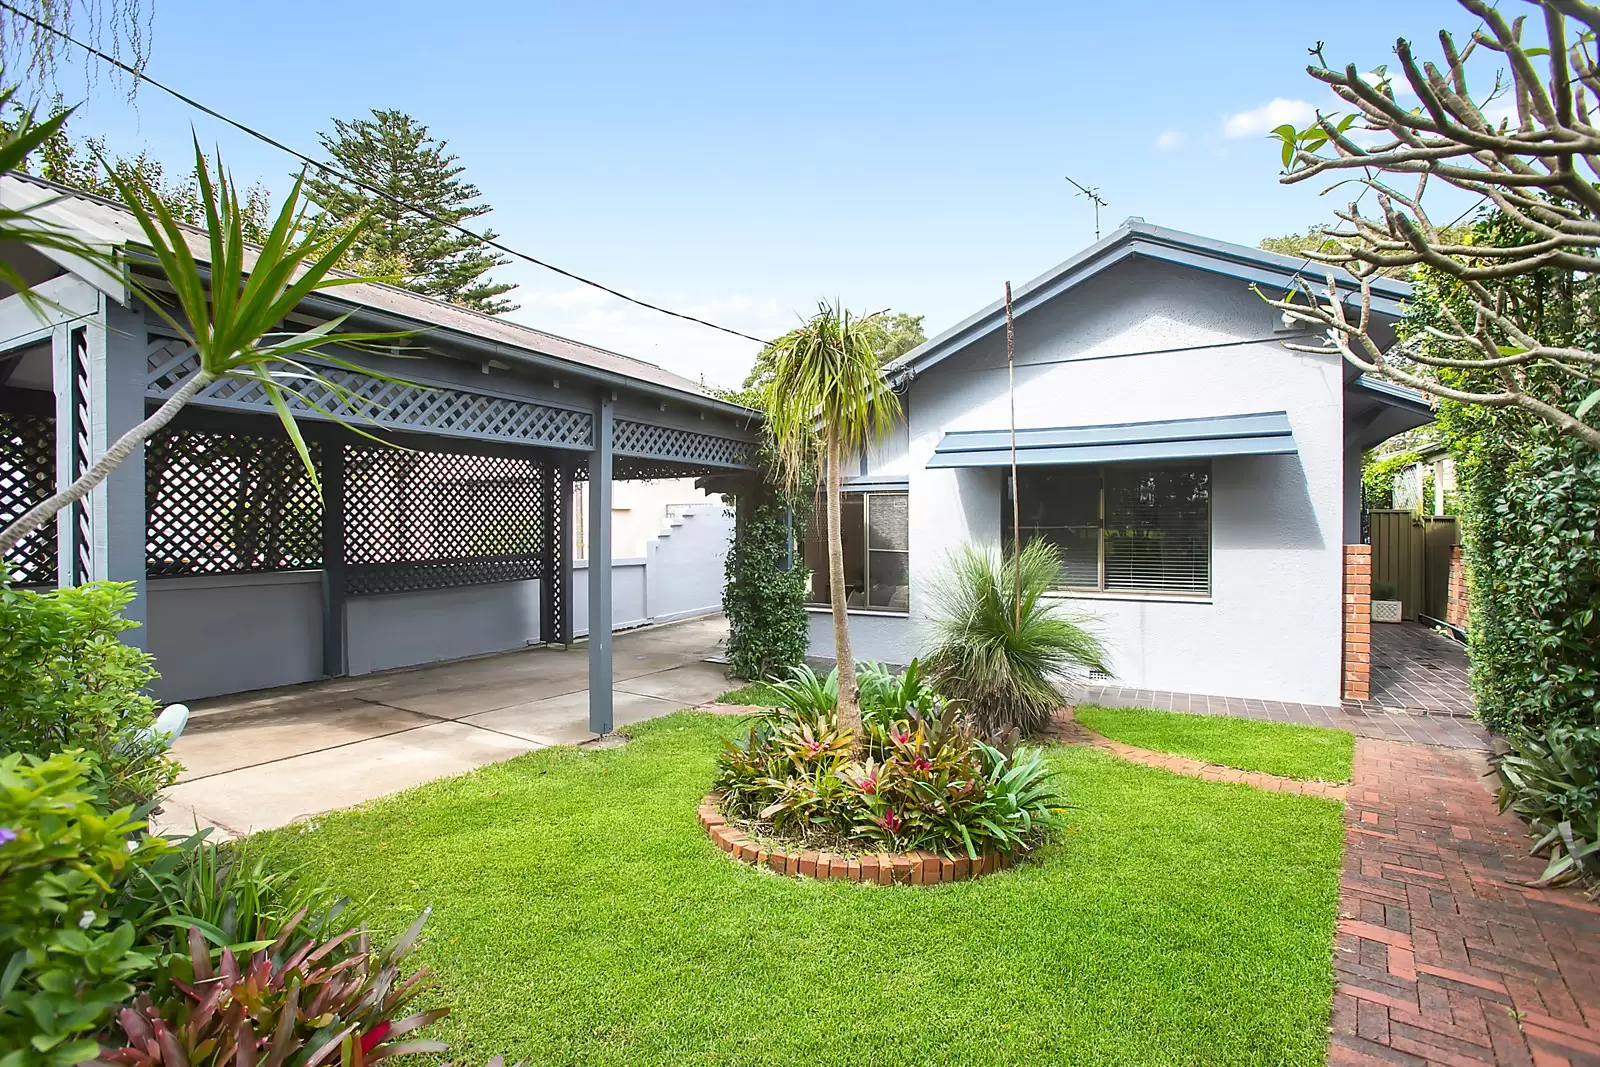 Photo #7: 28 Park Parade, Pagewood - Sold by Sydney Sotheby's International Realty